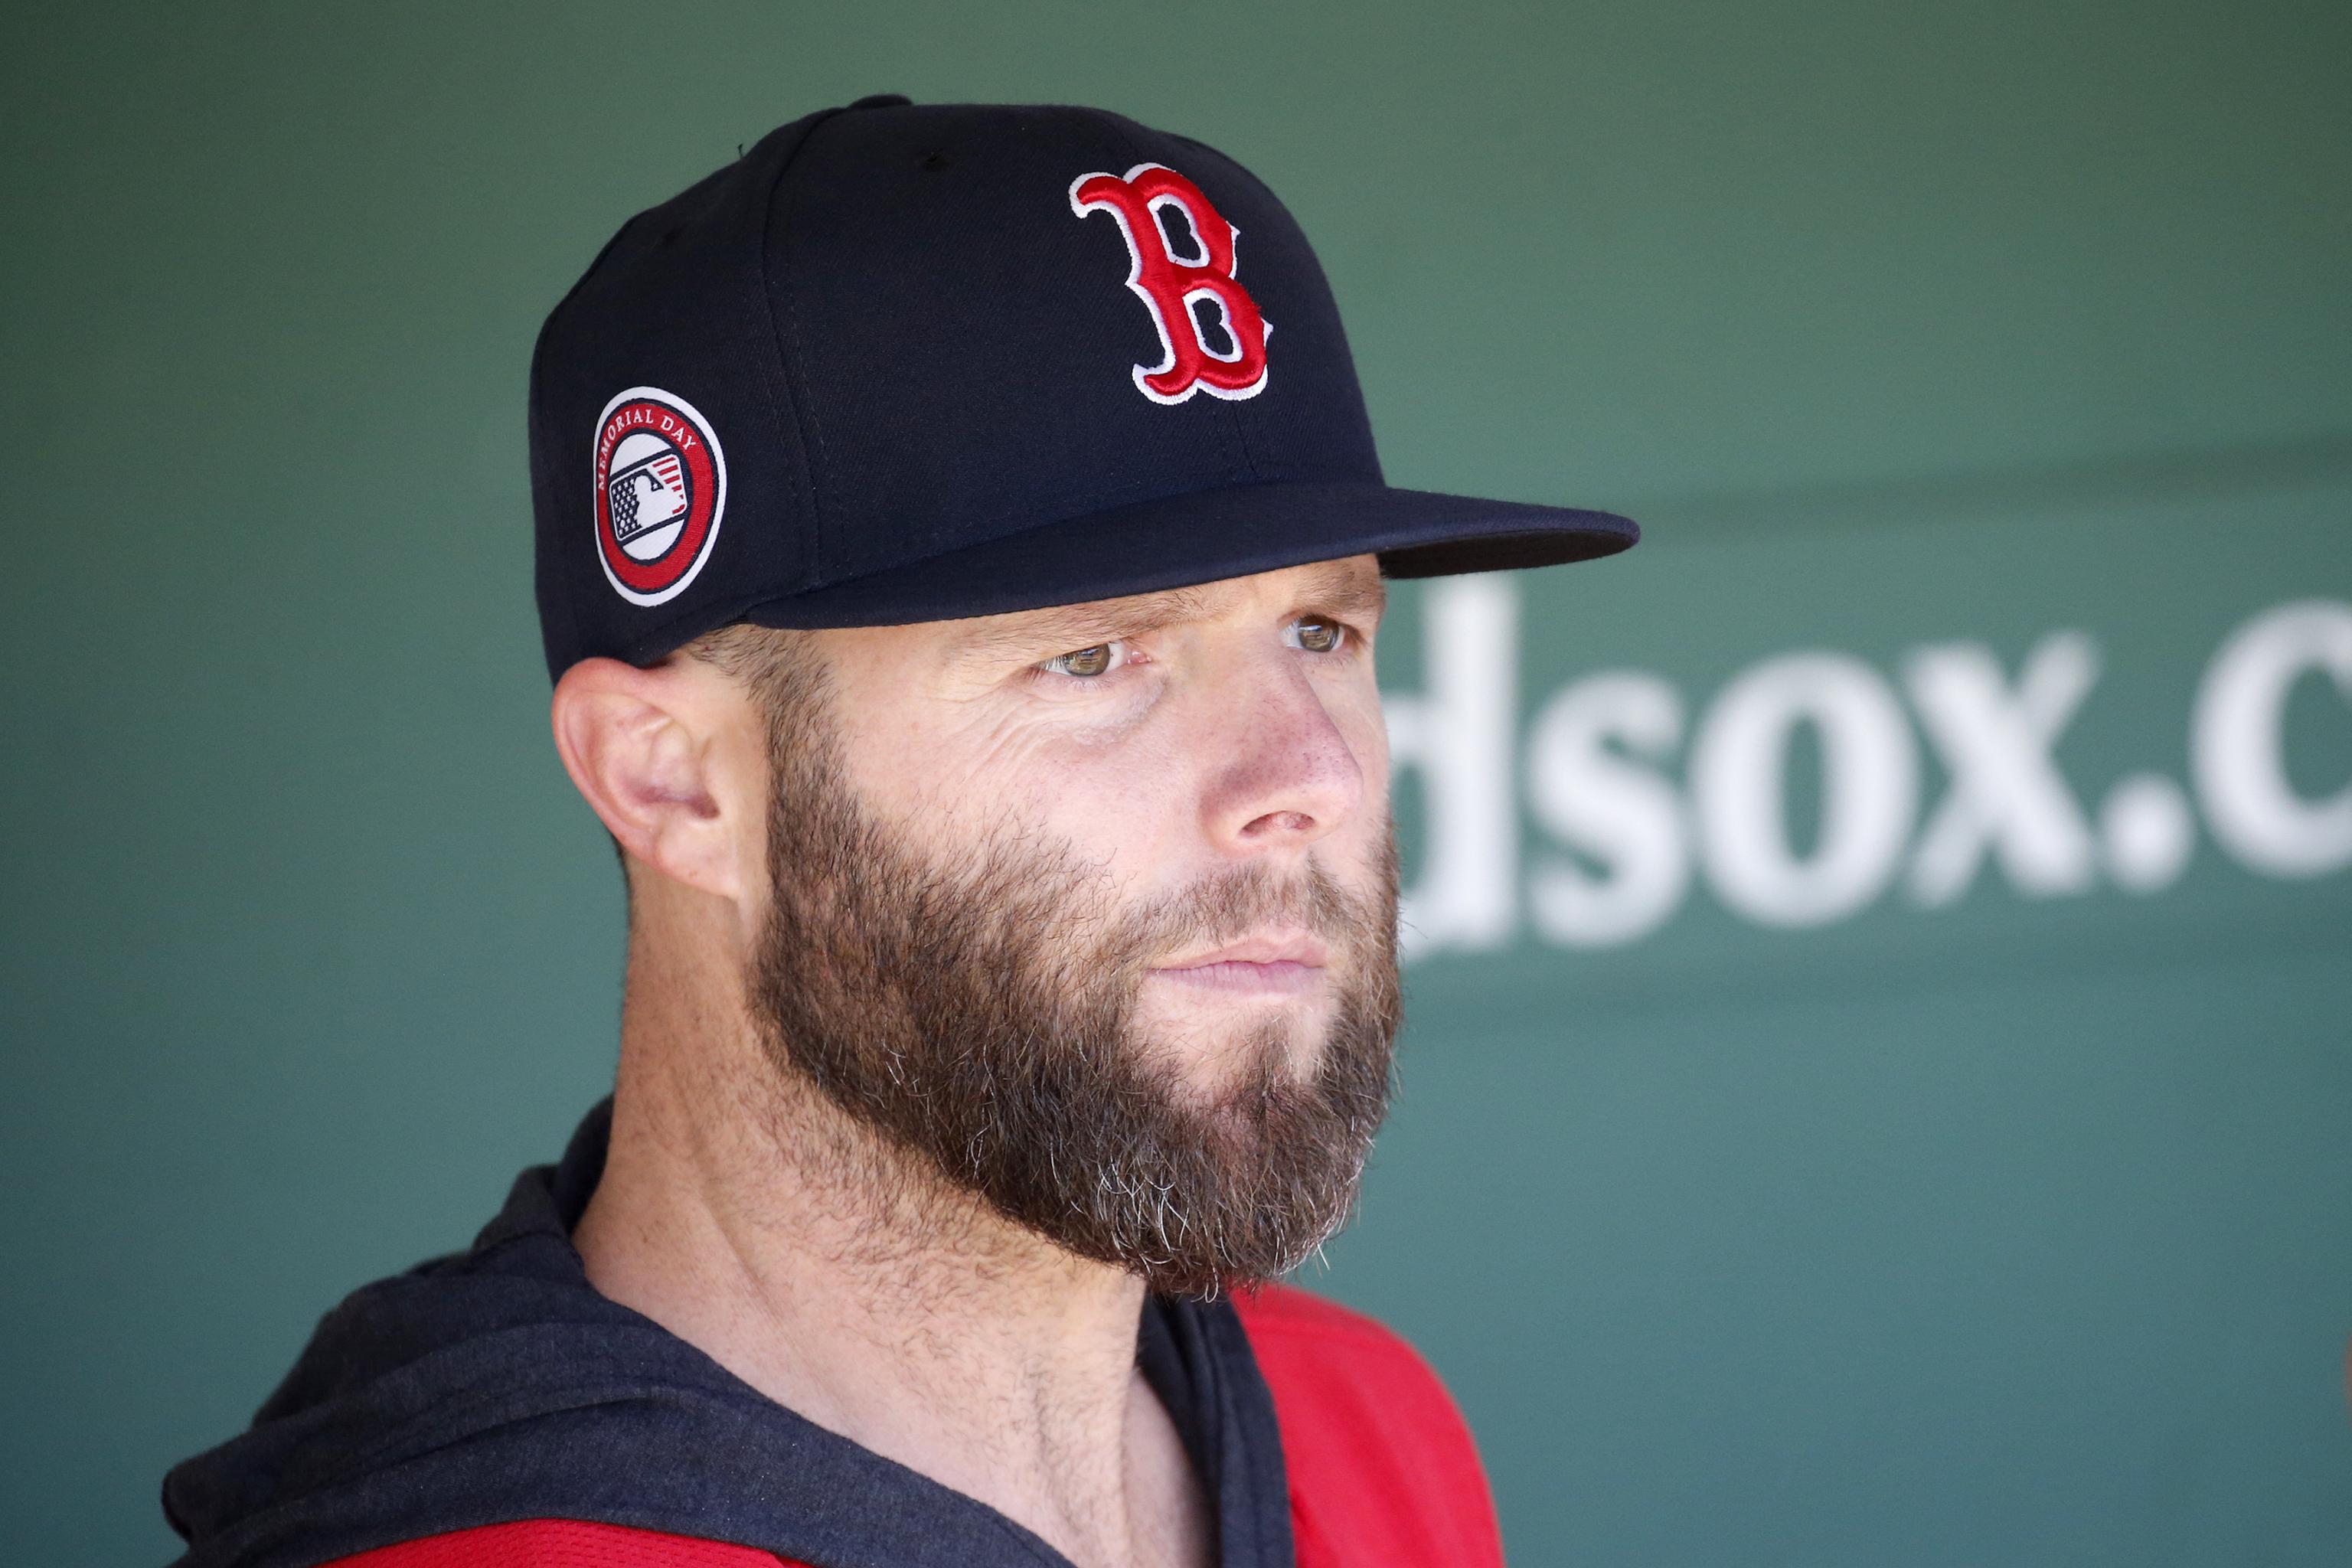 Boston Red Sox Roster: Will Dustin Pedroia be kept all year